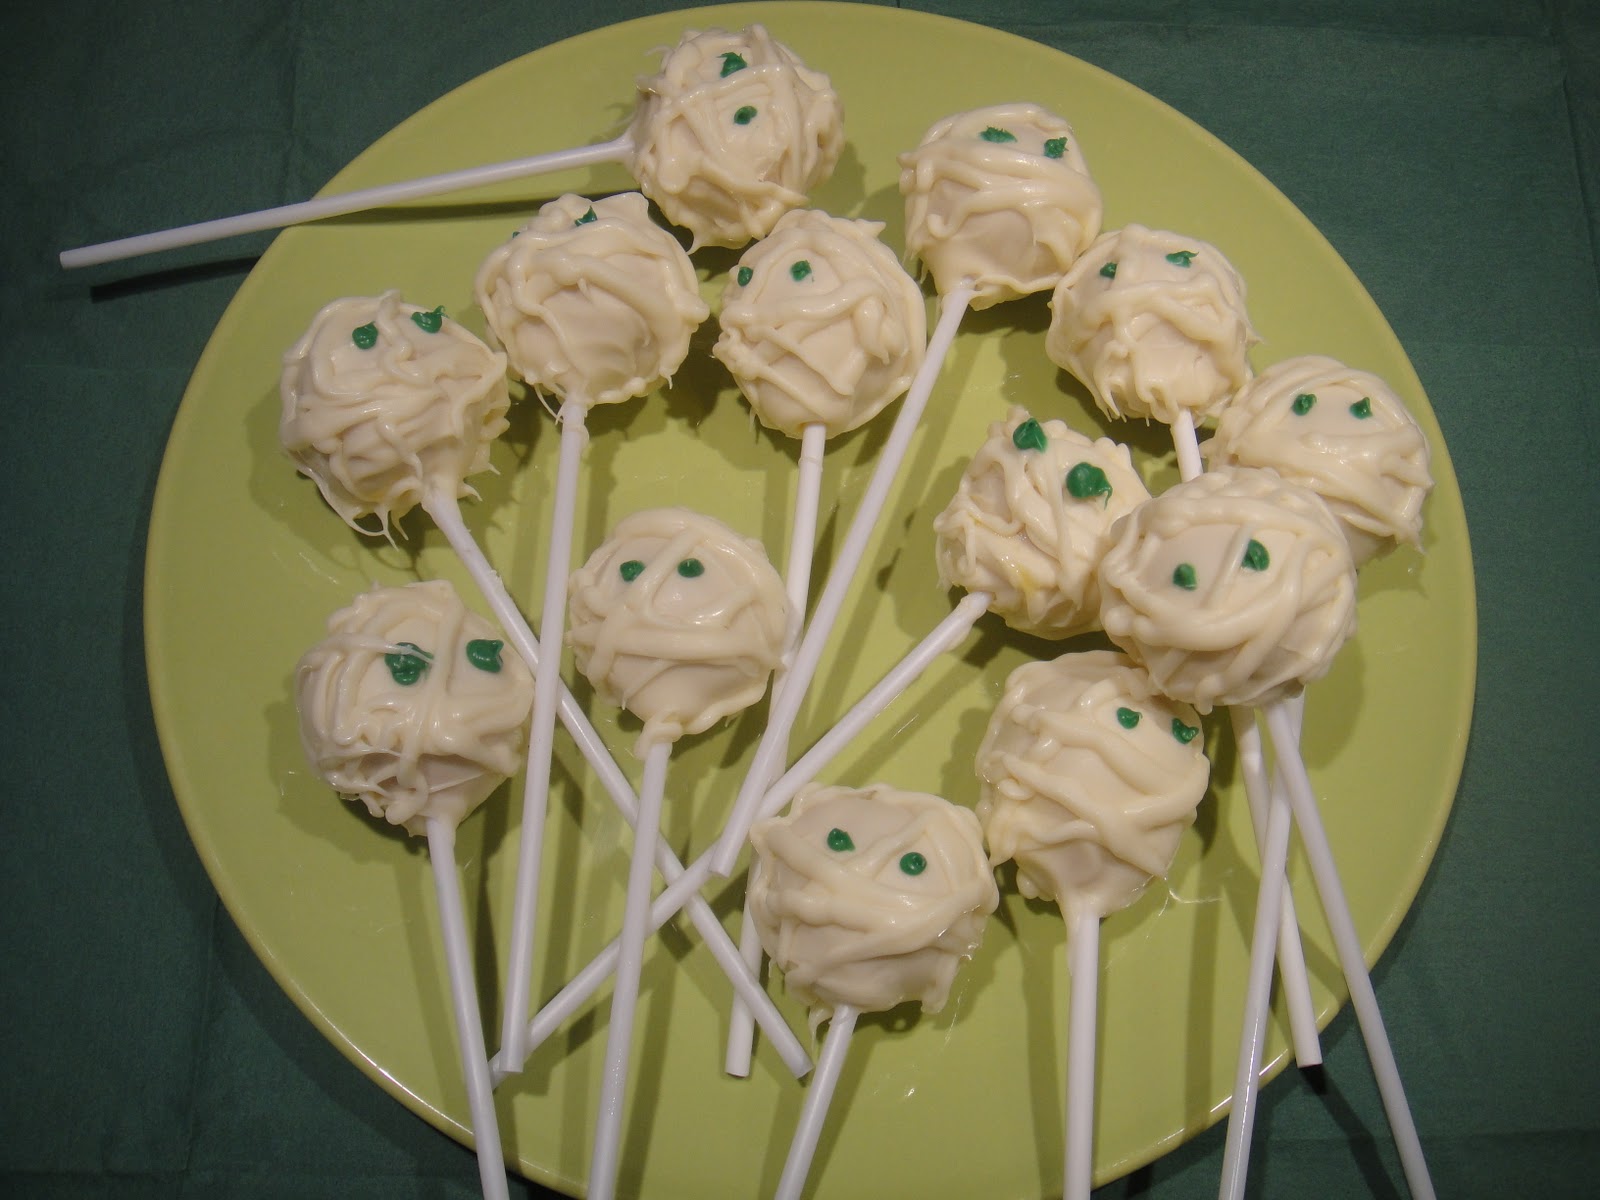 halloween cake pops images  cake pops - highly recommend if you want to make amazing looking cake